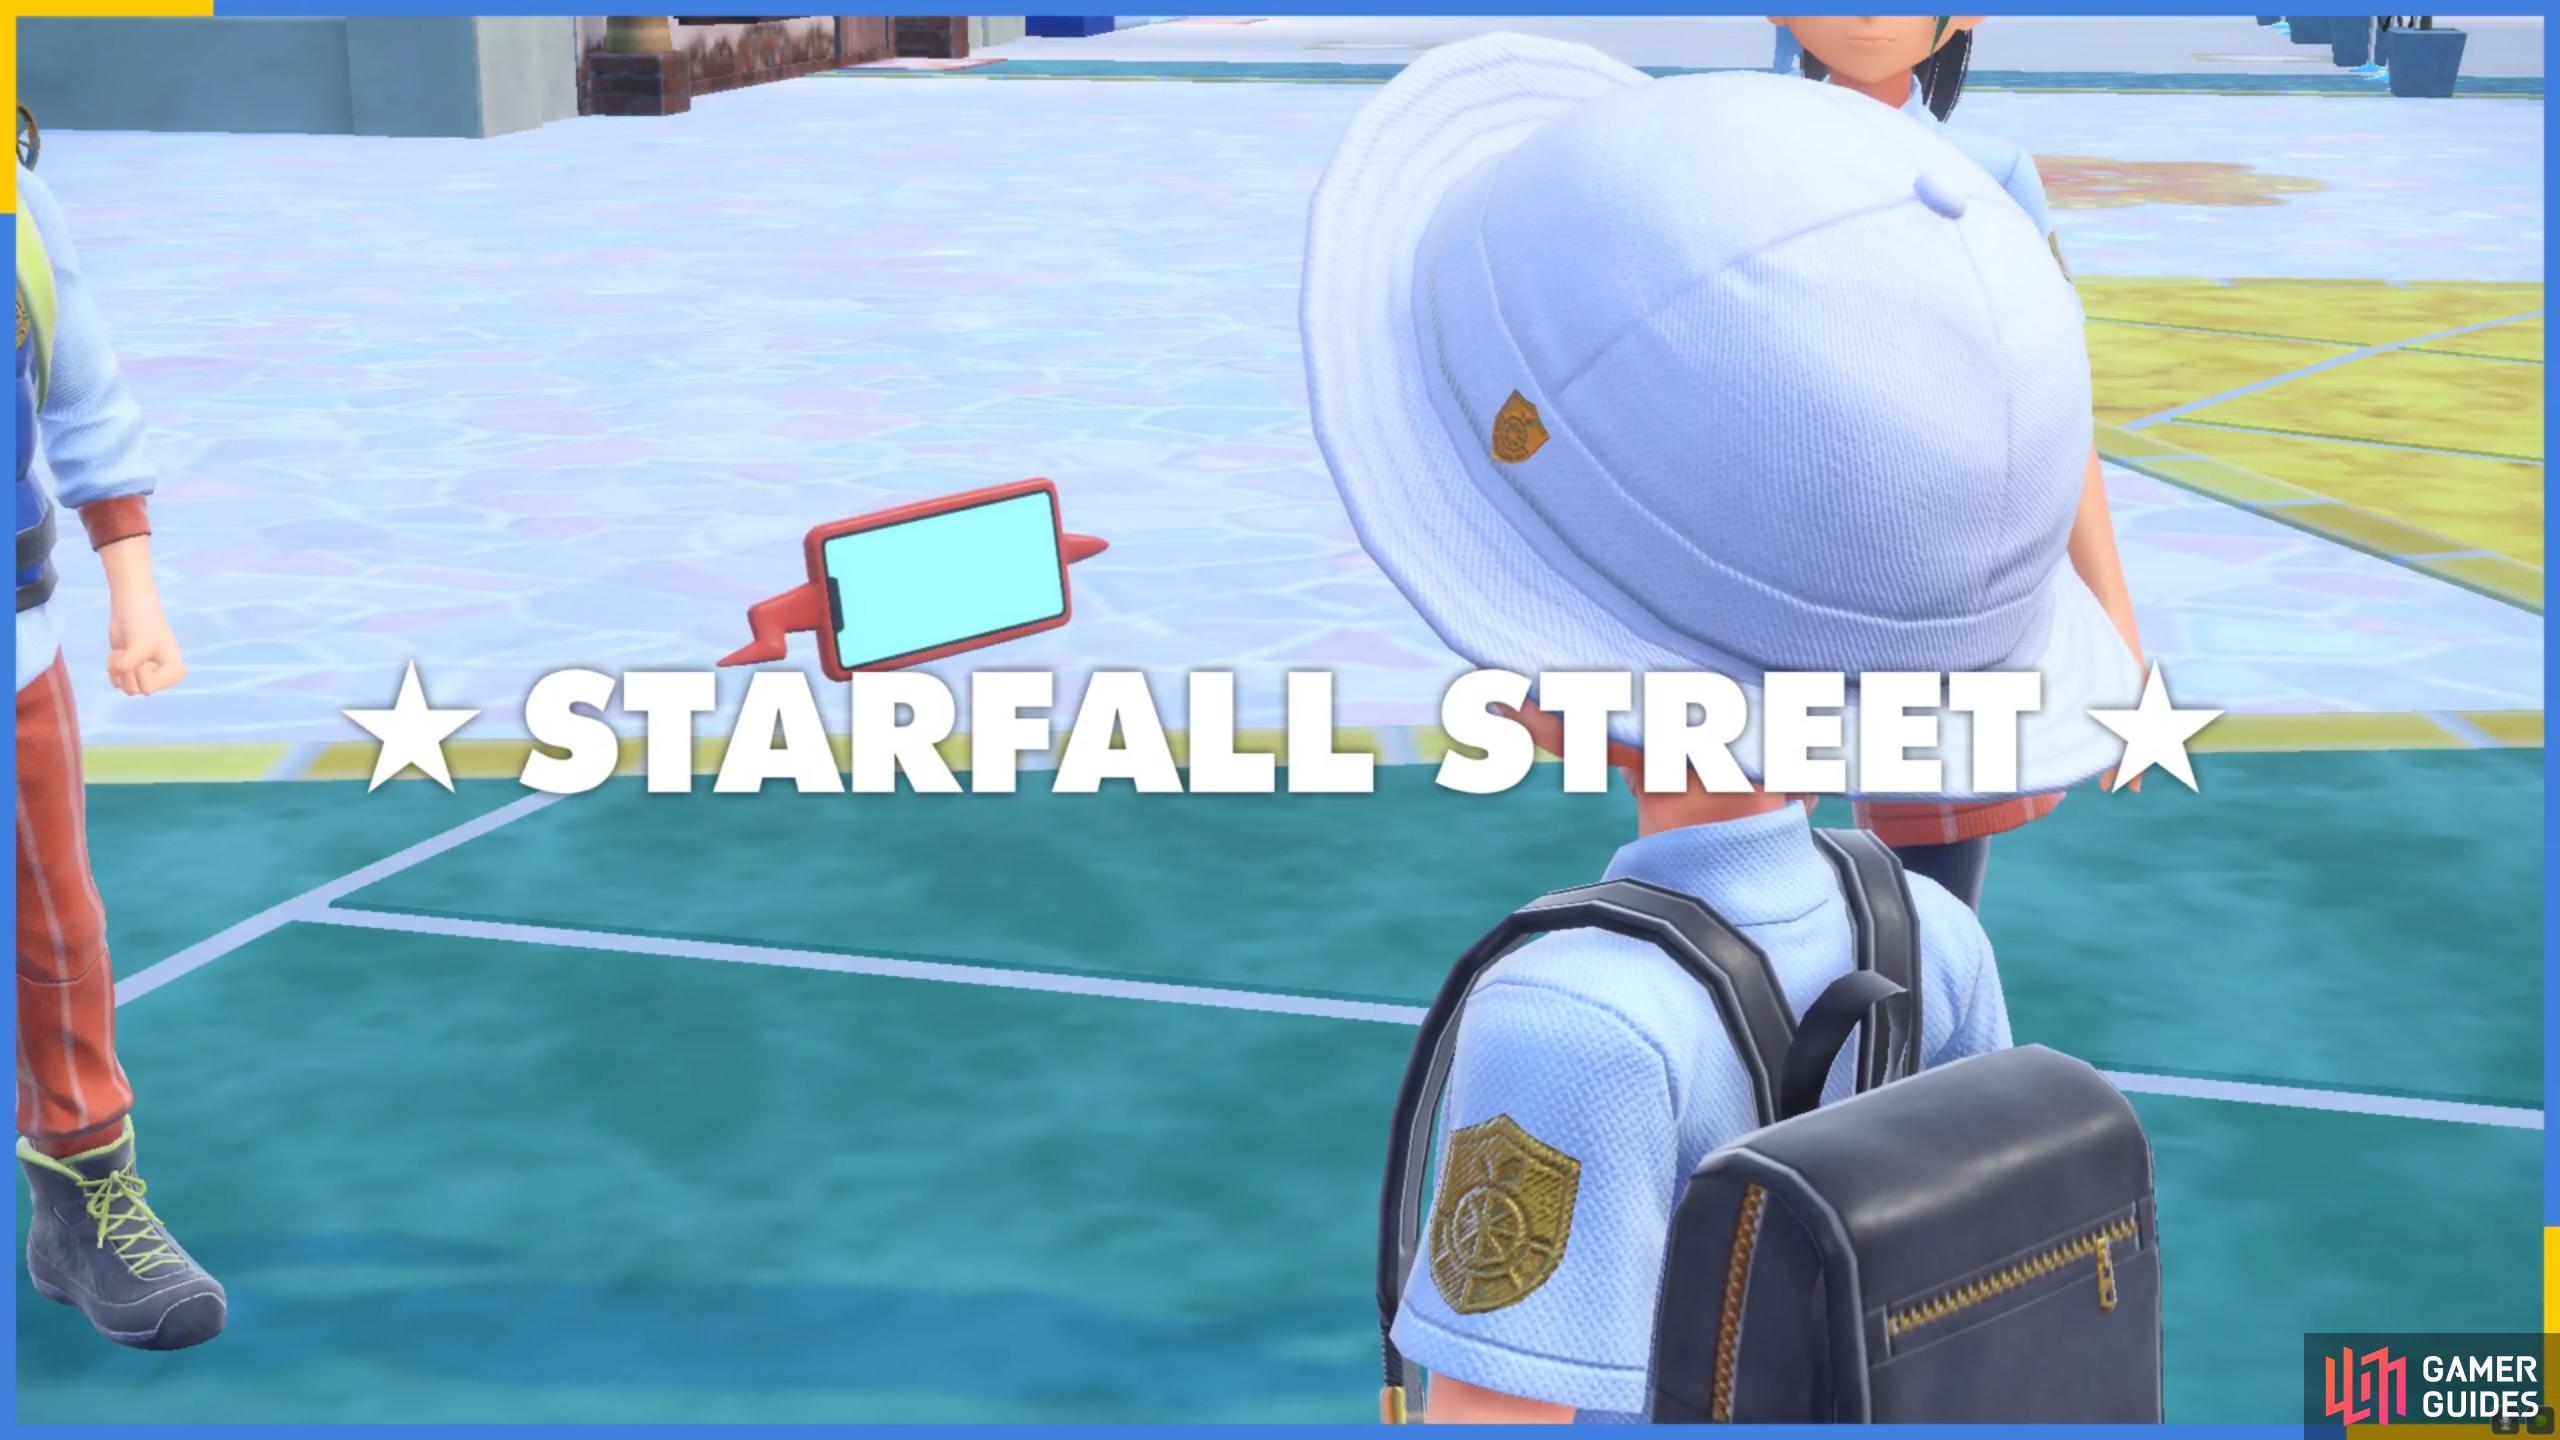 In Starfall Street, your task is to disband Team Star.